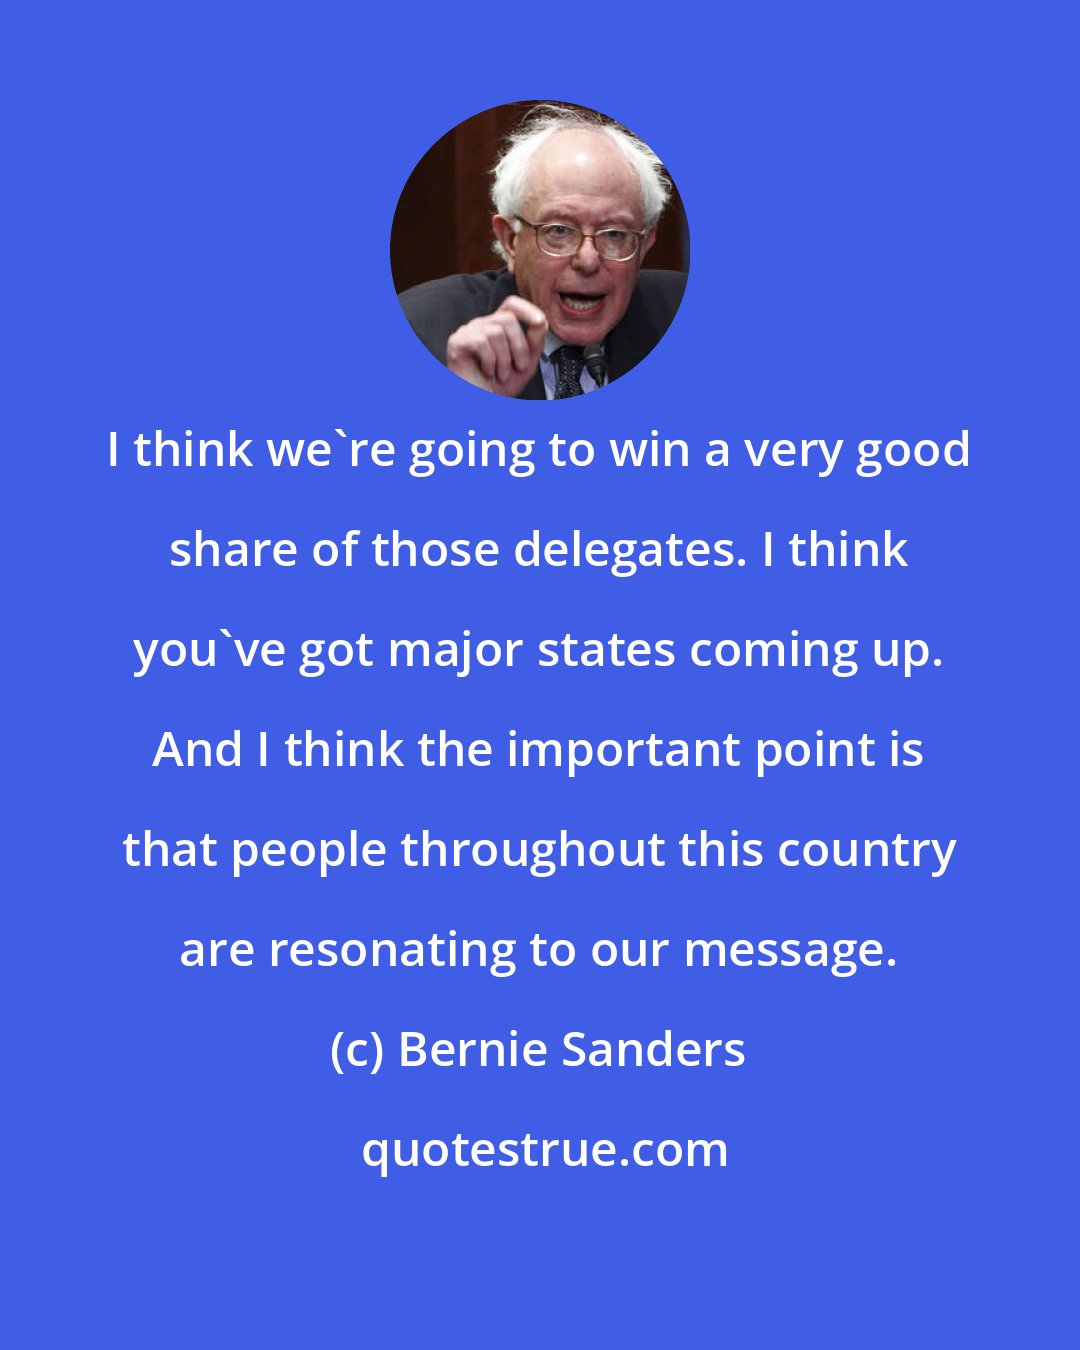 Bernie Sanders: I think we're going to win a very good share of those delegates. I think you've got major states coming up. And I think the important point is that people throughout this country are resonating to our message.